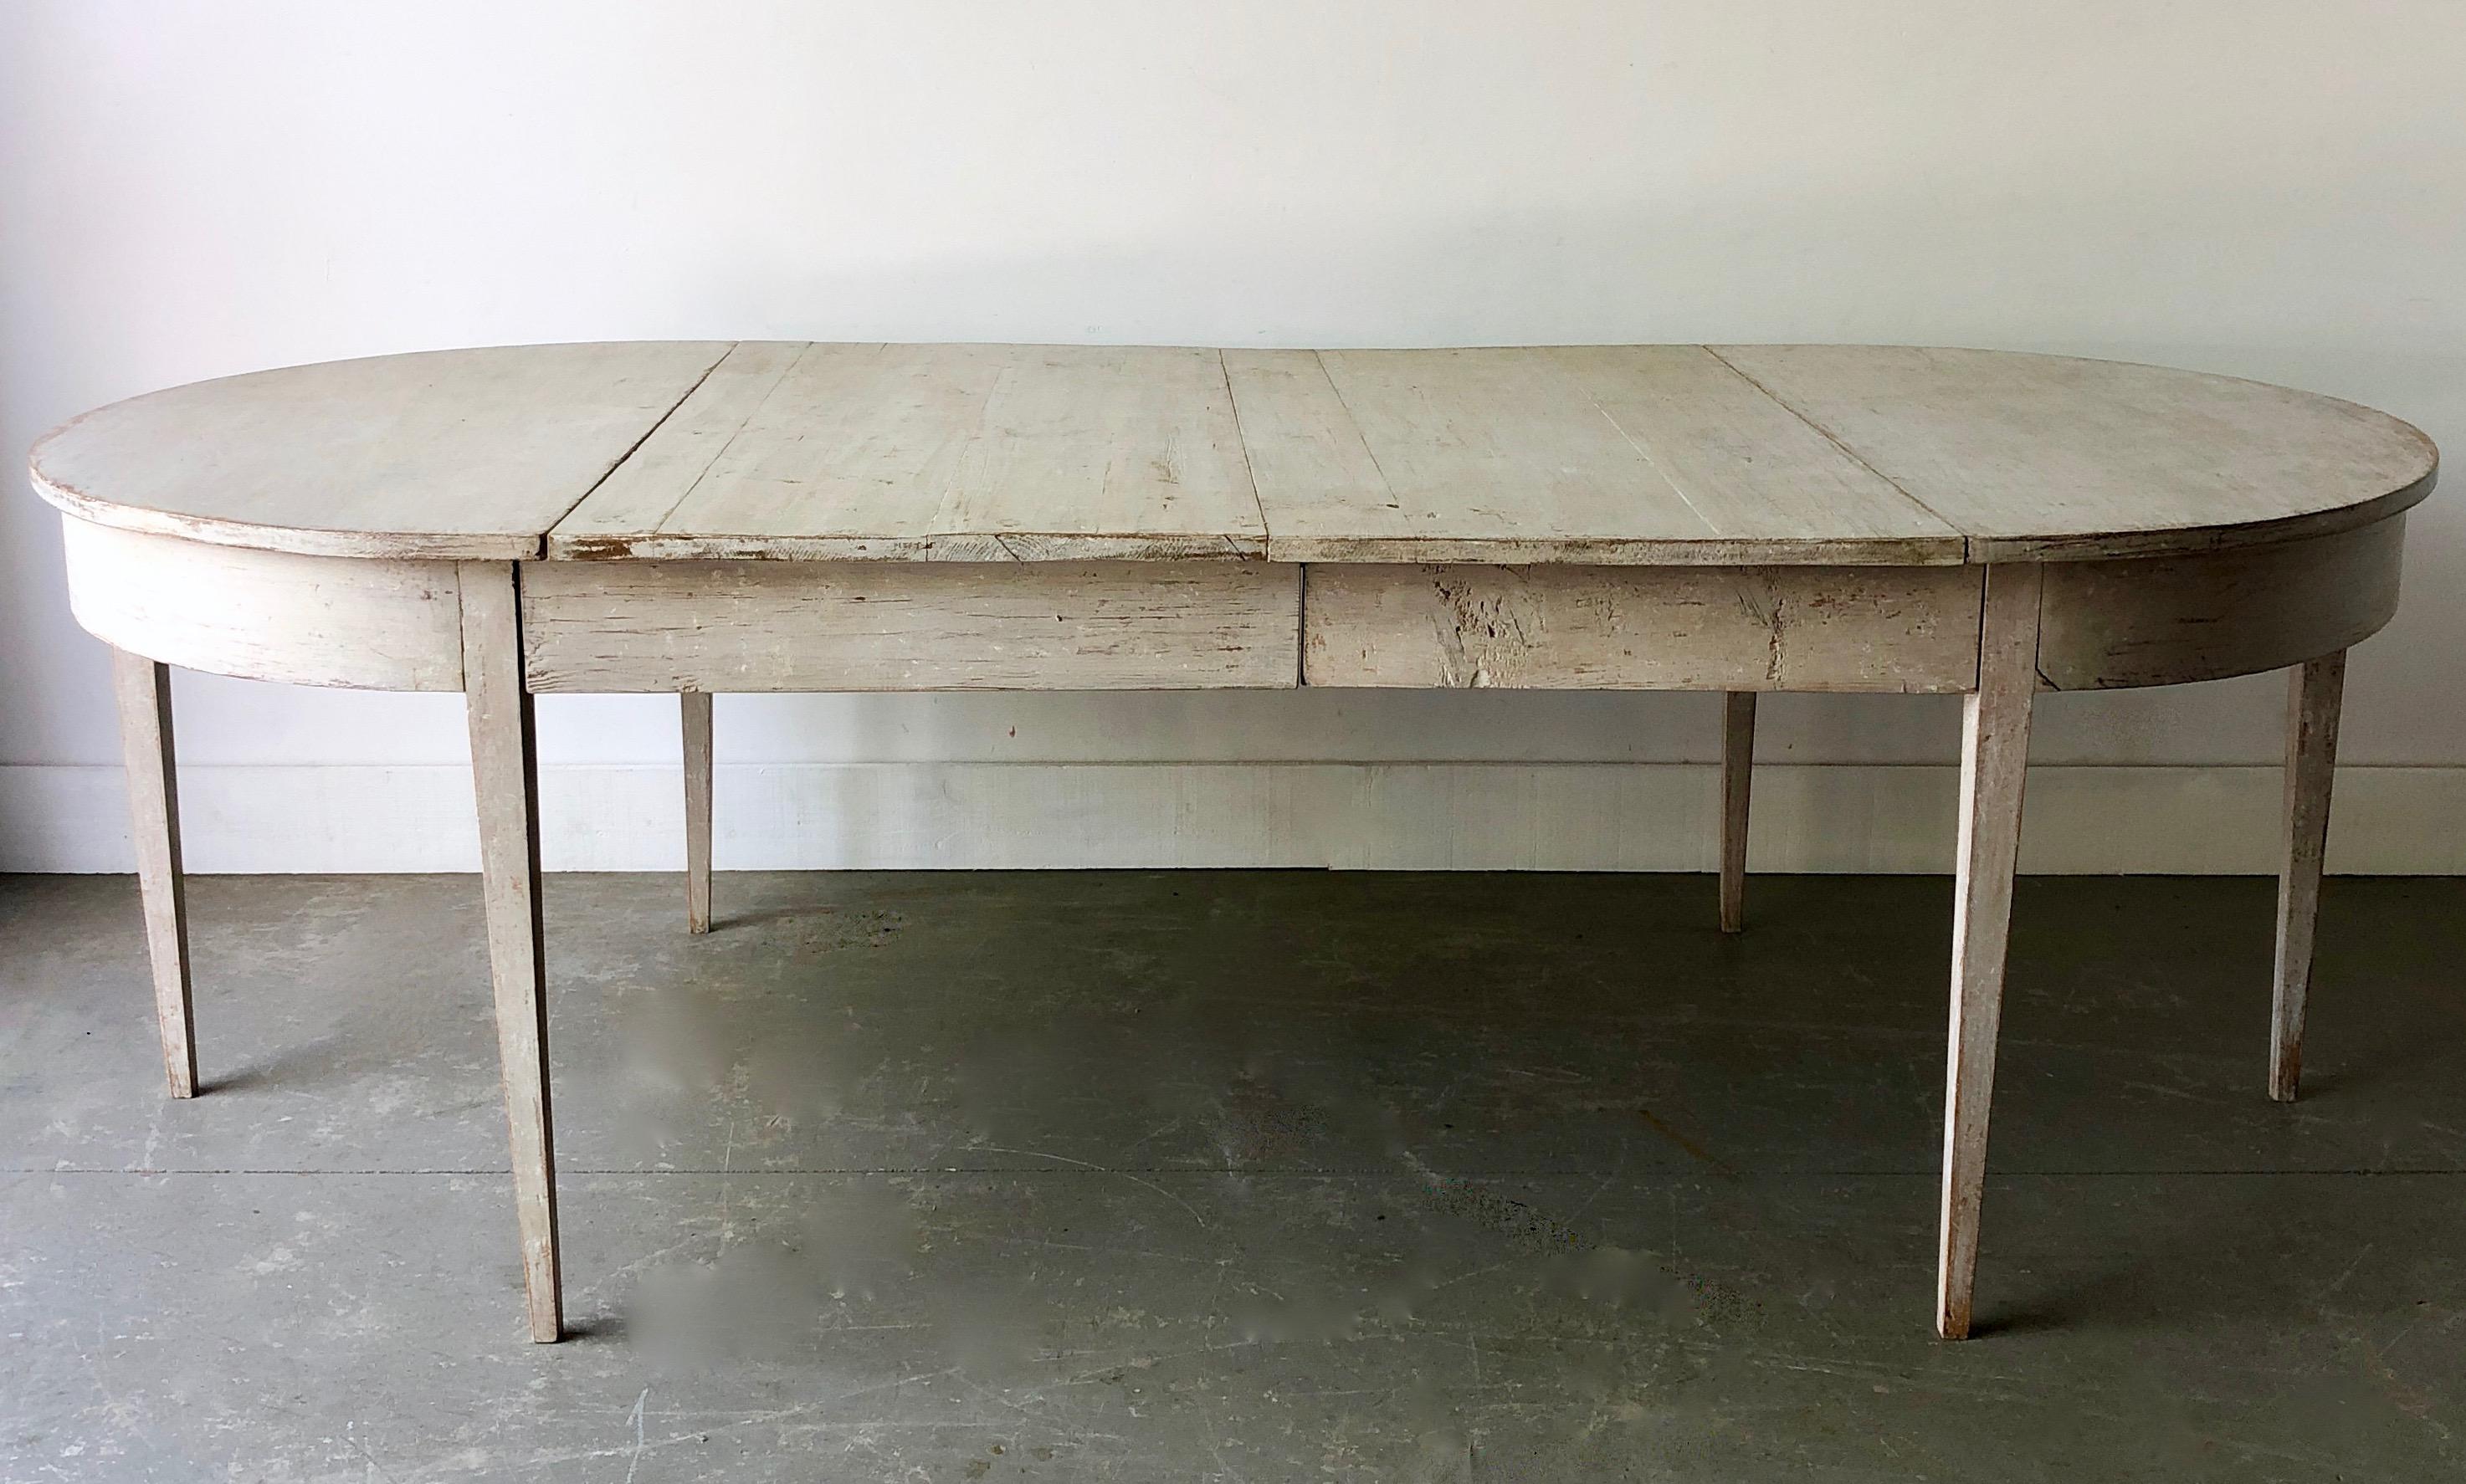 Early 19th century later painted Gustavian period extending table with two leaves and tapered legs. A practical piece that can be used as round table/ a pair of consoles or extended with one or two leaves up to 93